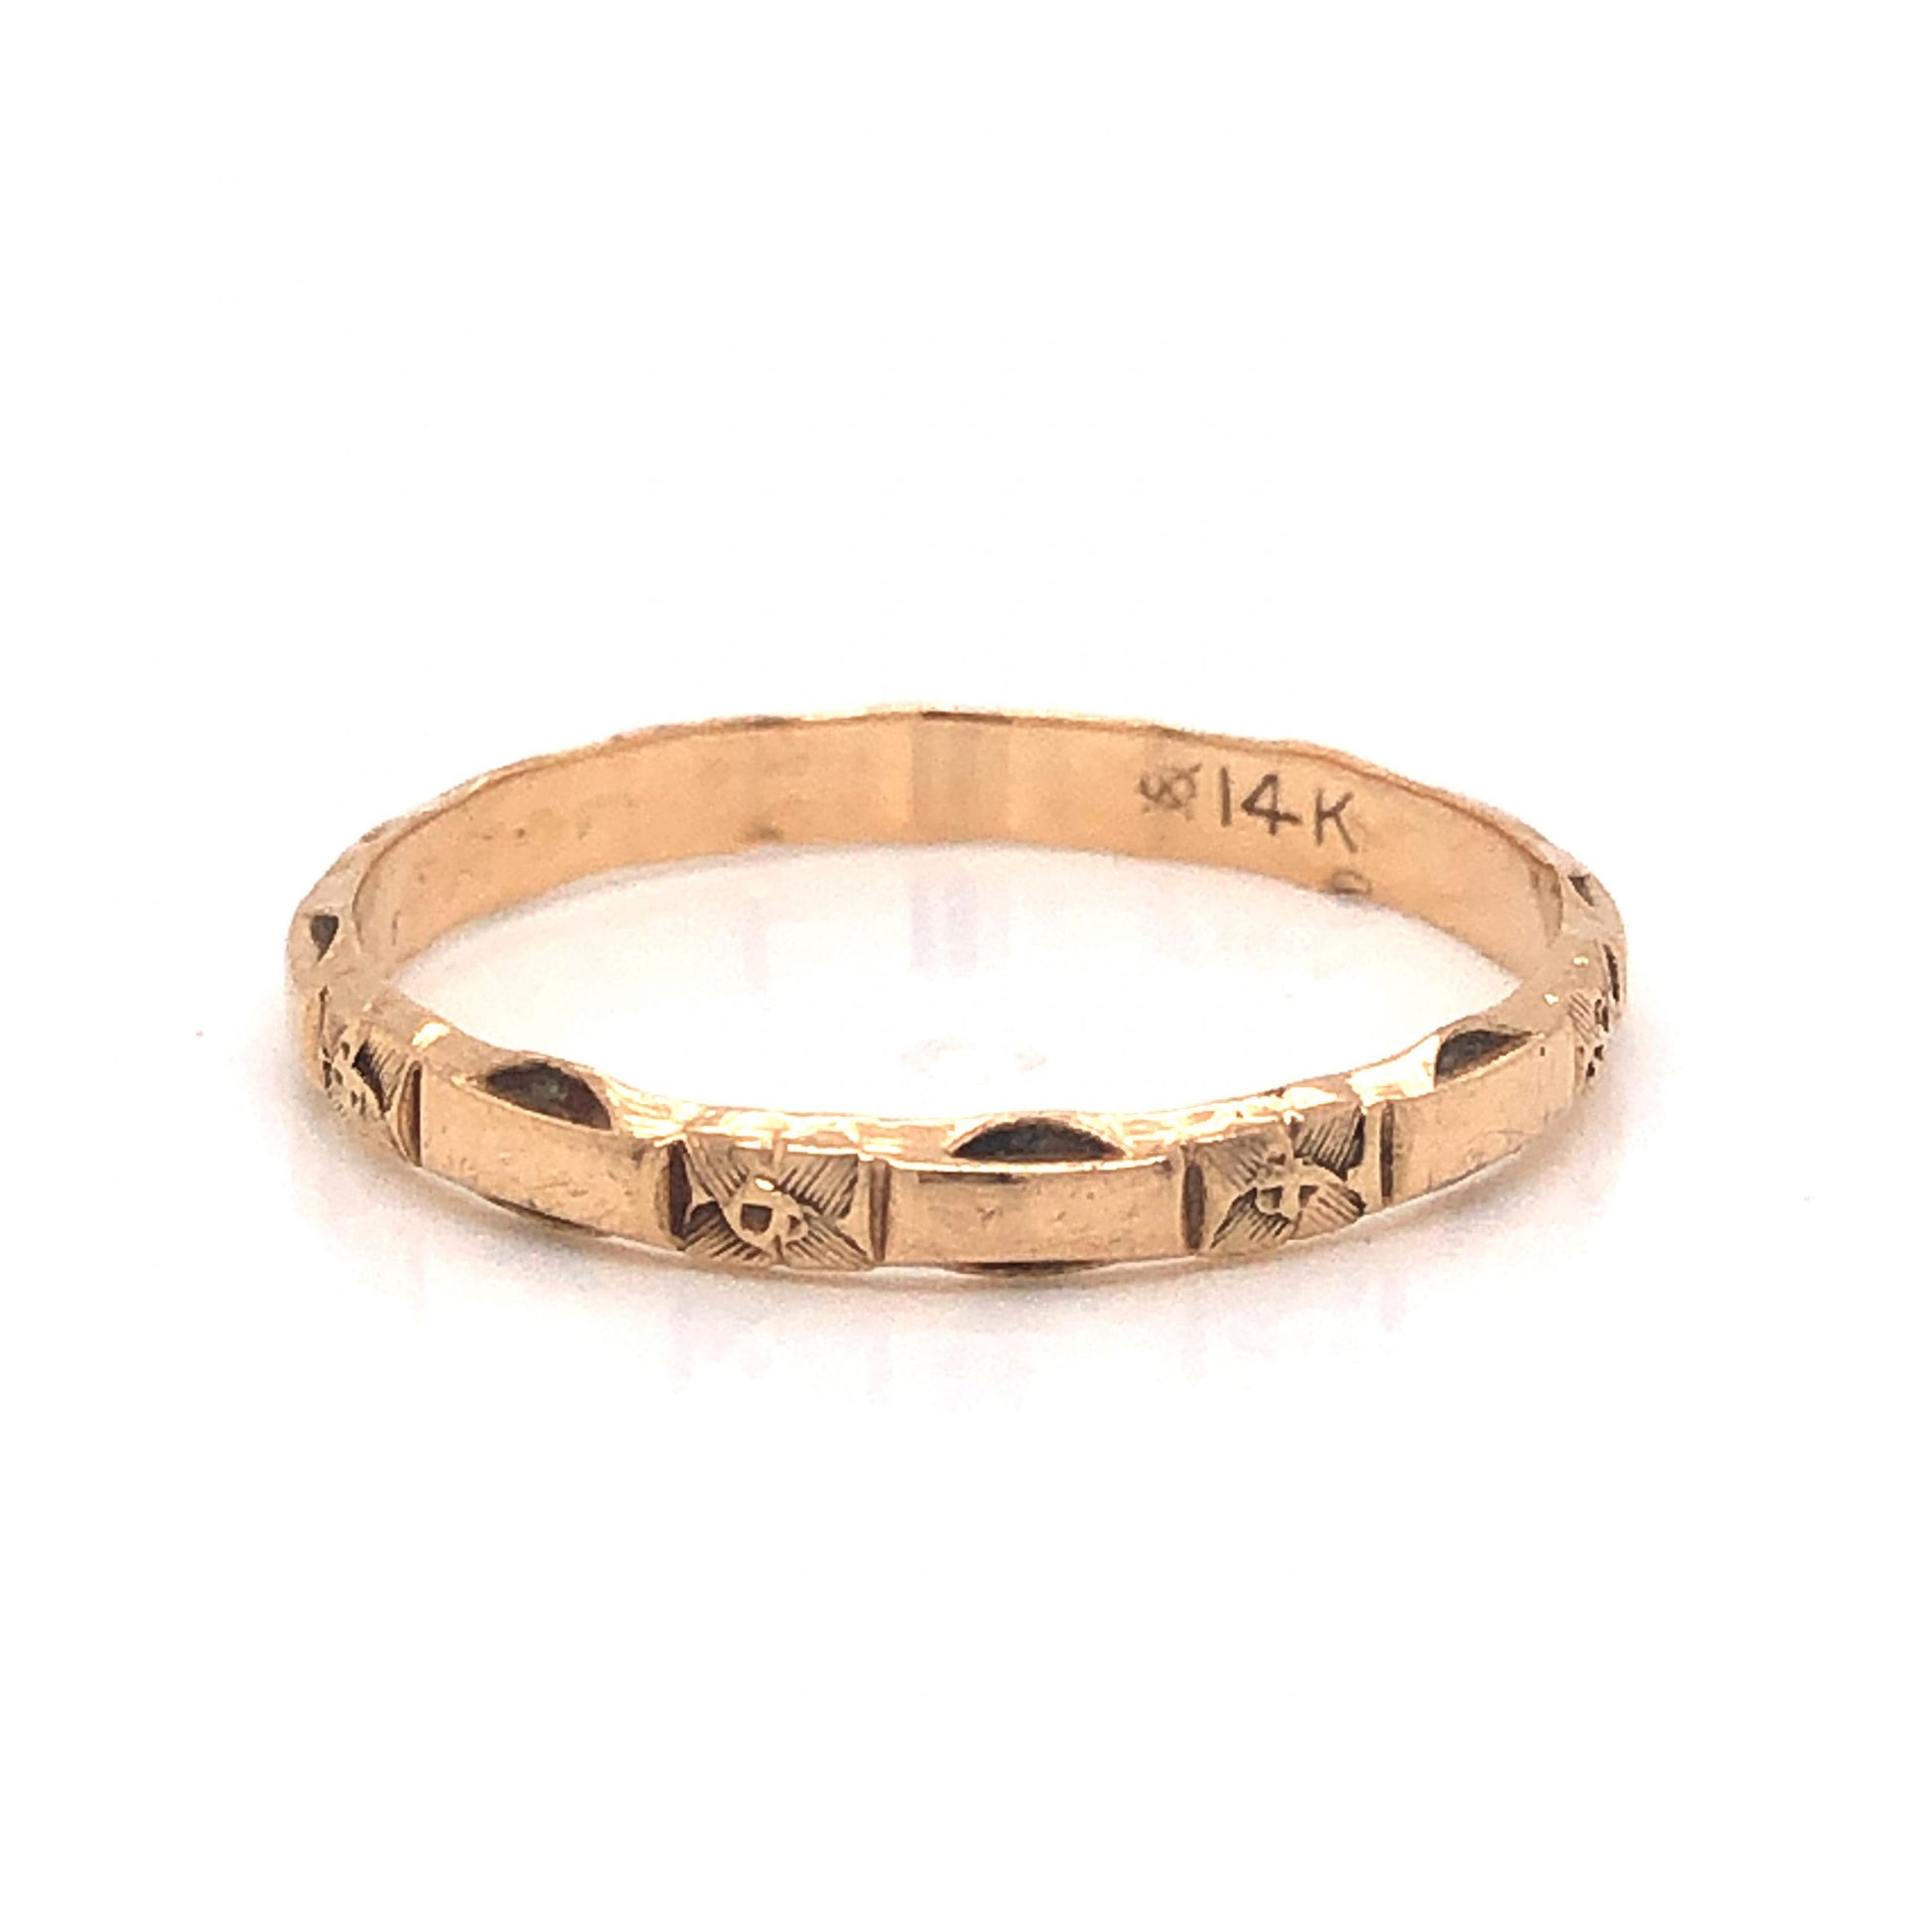 Antique Engraved Orange Blossom Wedding Band in 14k Yellow GoldComposition: 14 Karat Yellow Gold Ring Size: 7 Total Gram Weight: 1.3 g Inscription: 14k
      